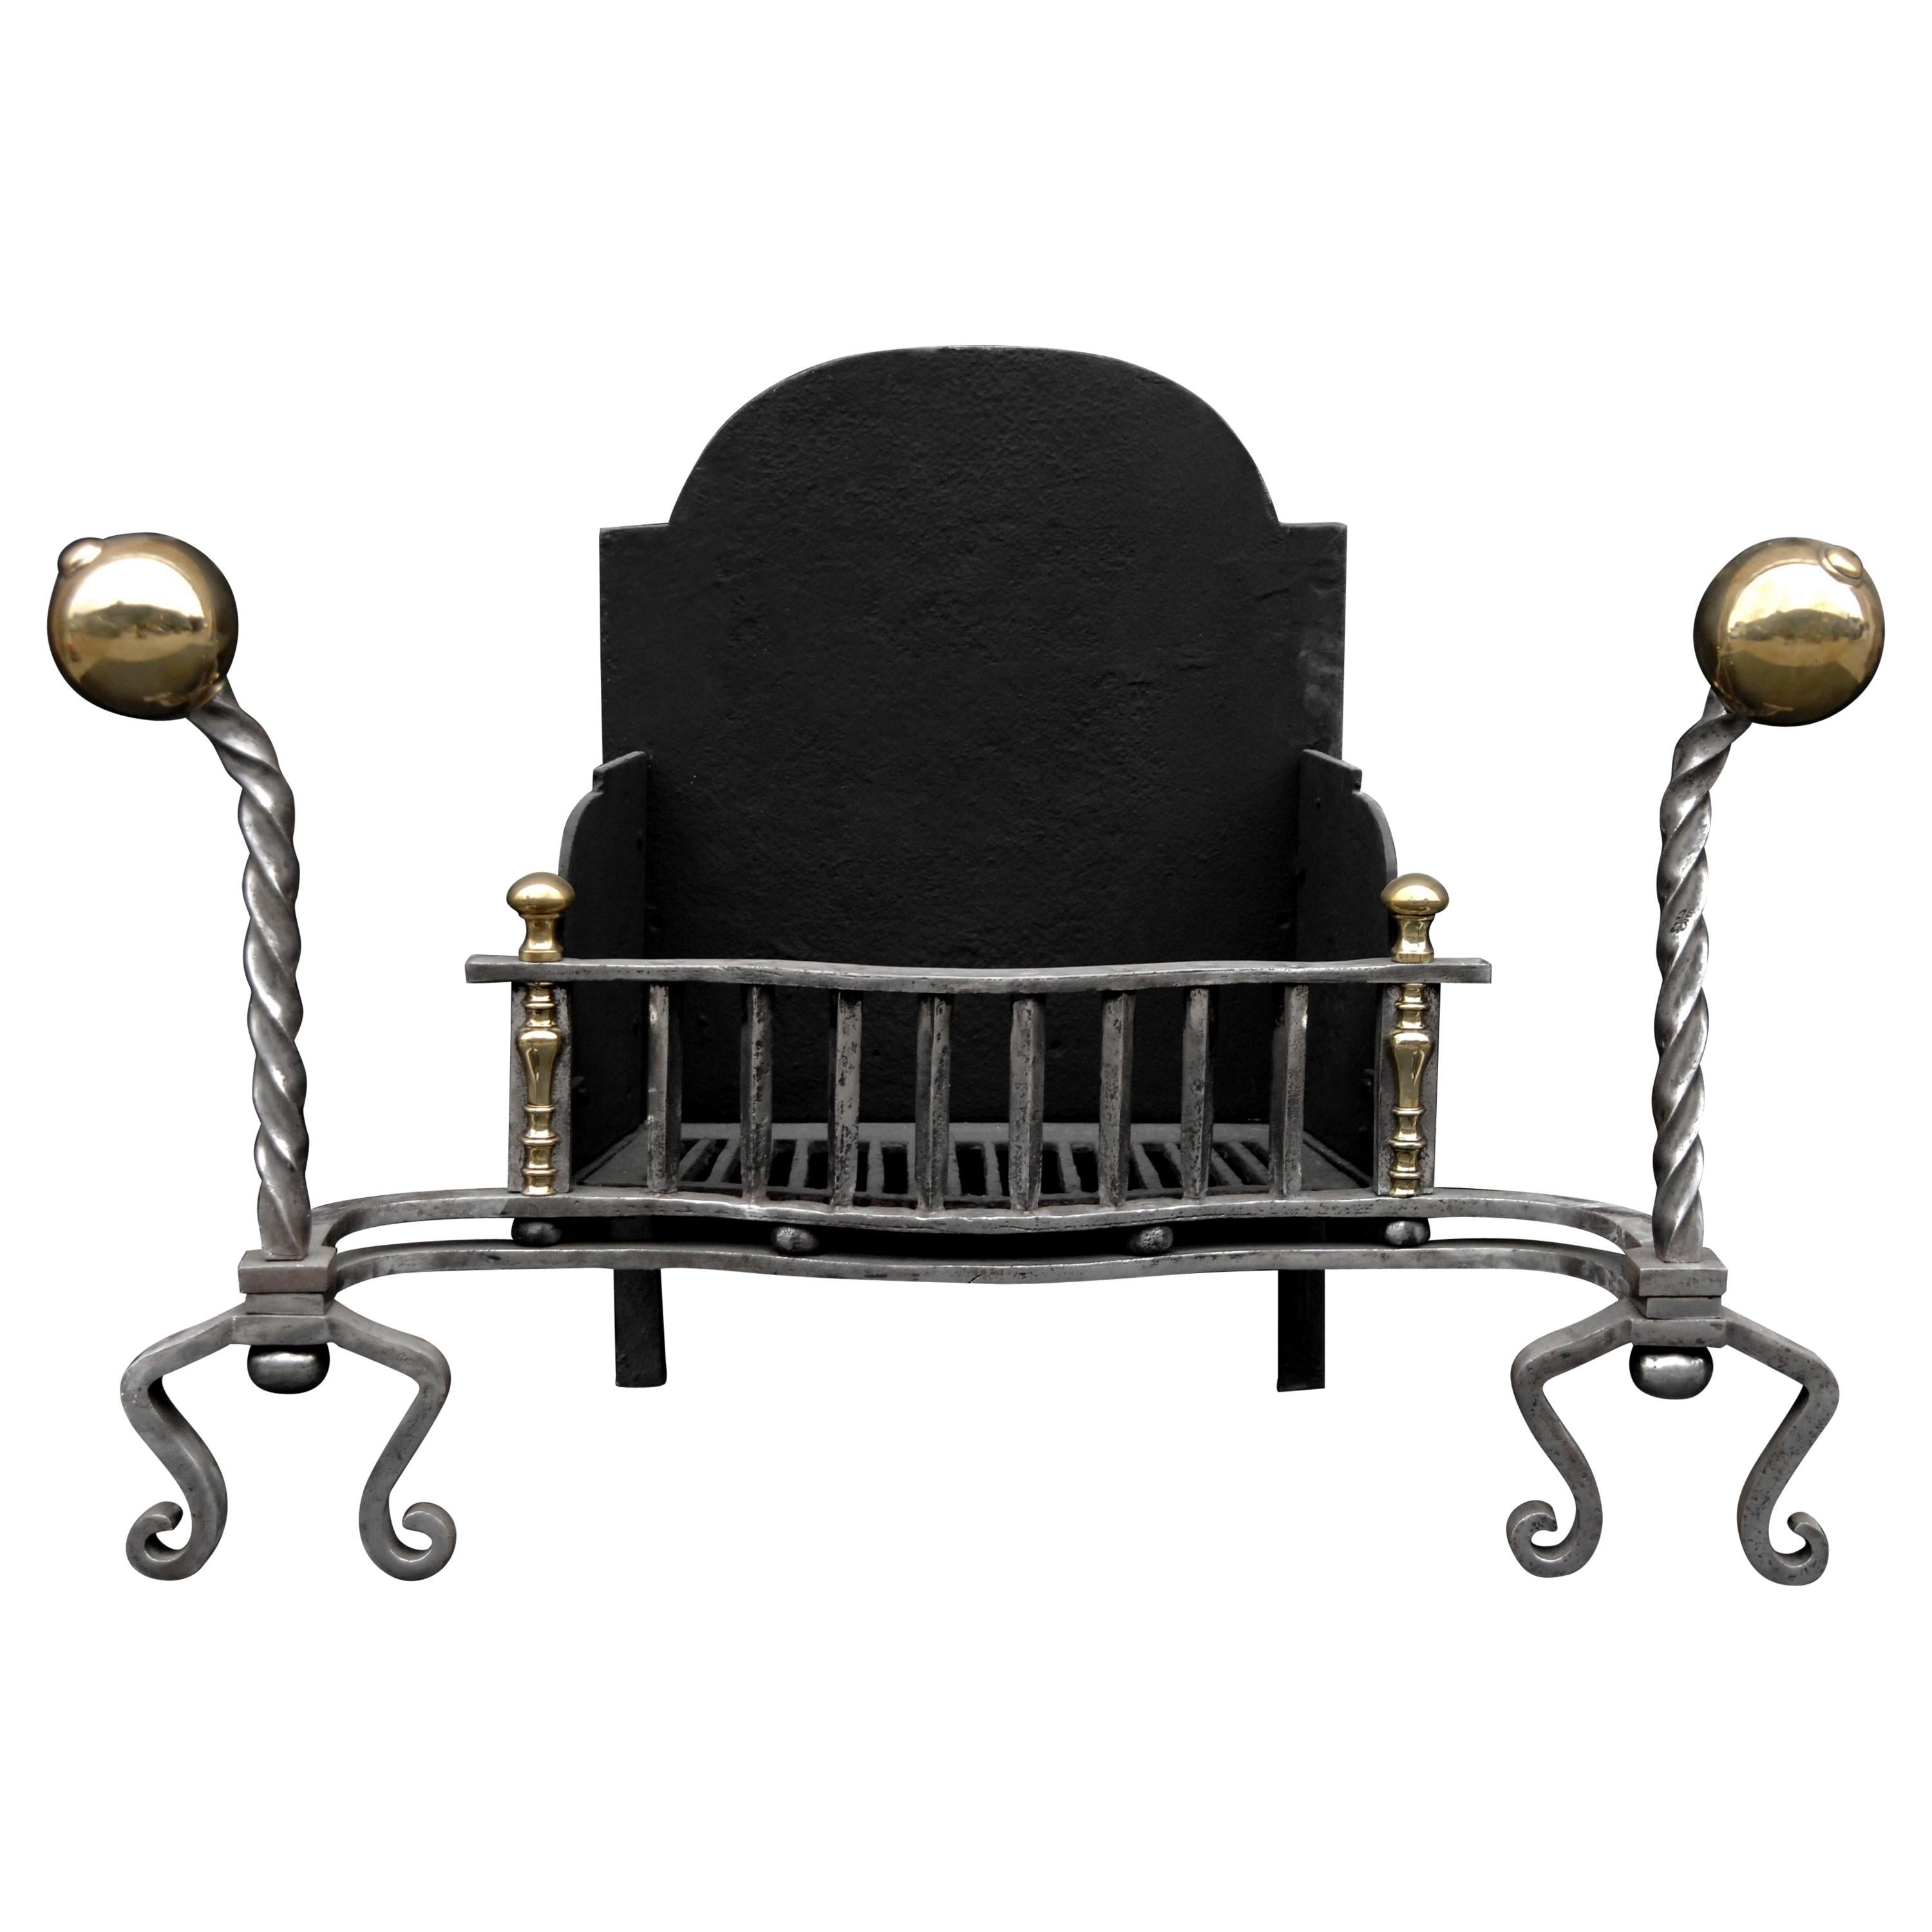 Prominent Mid 19th Century English Polished Wrought Iron Firegrate For Sale